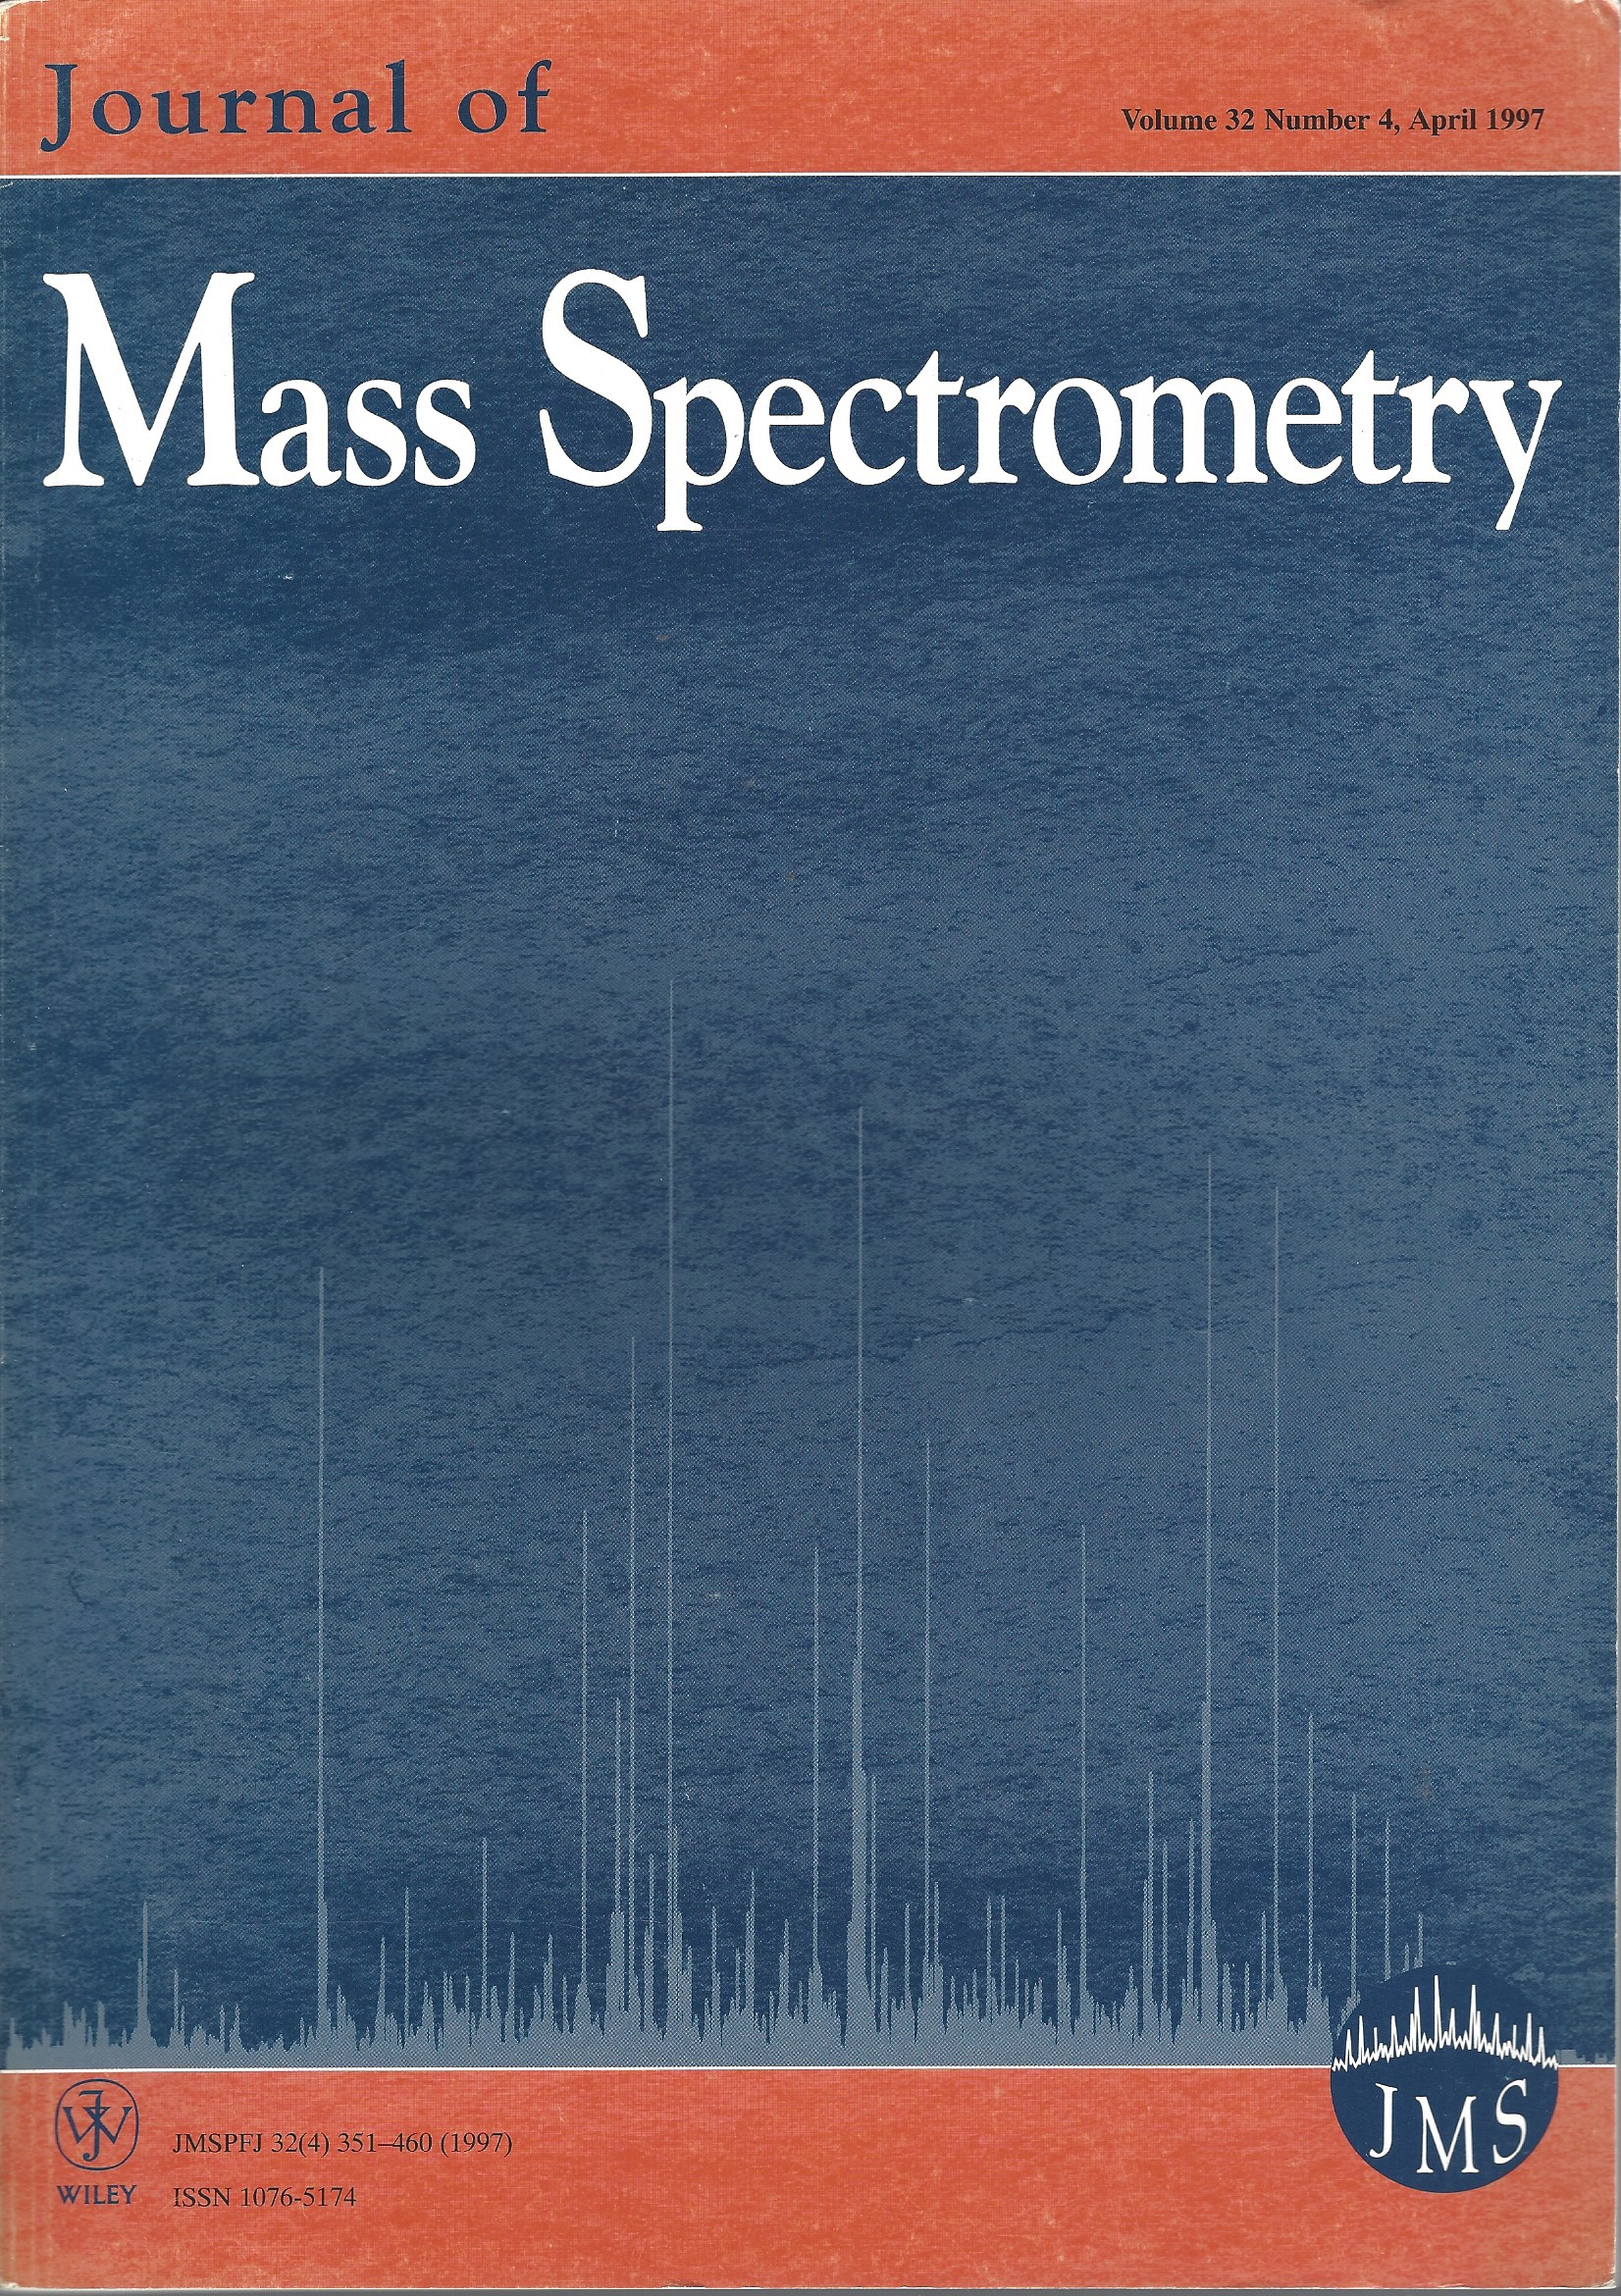 CAPRIOLI RICHARD M. ( EDITOR-IN -CHIEF) - Journal of Mass Spectrometry: Volume 32, Number 4, April 1997